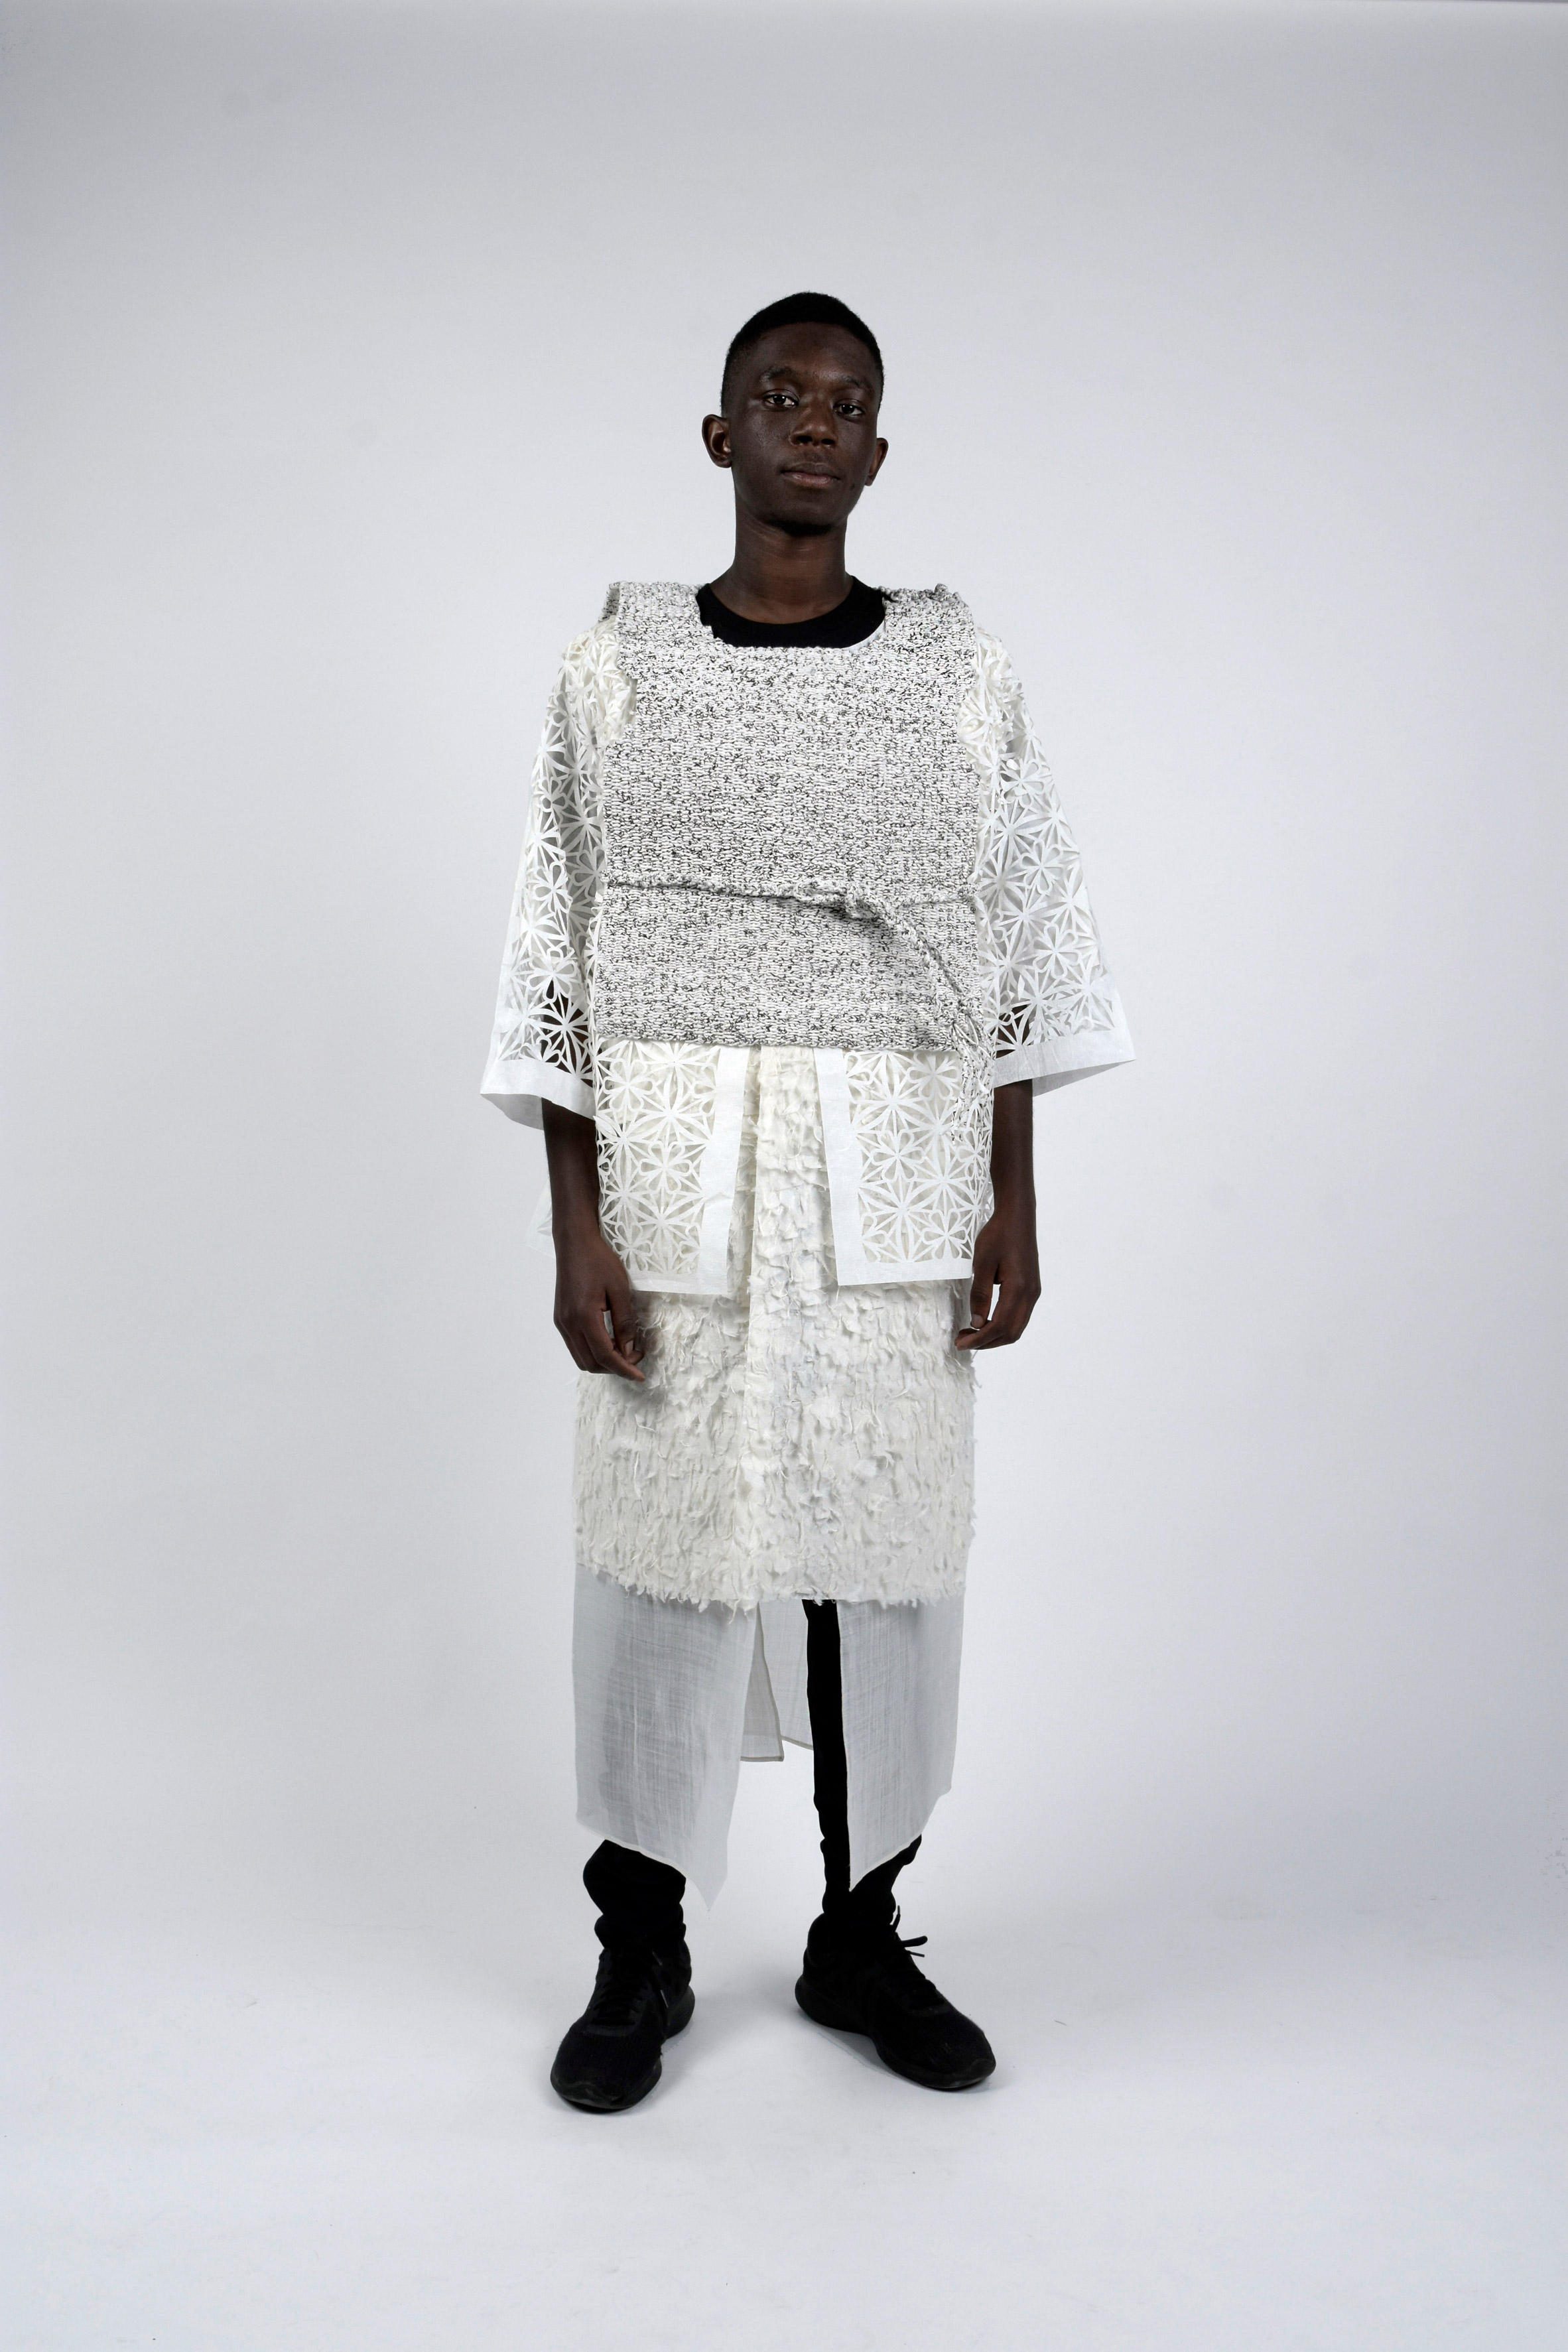 Sun Lee reworks traditional Korean craft into clothes made from paper